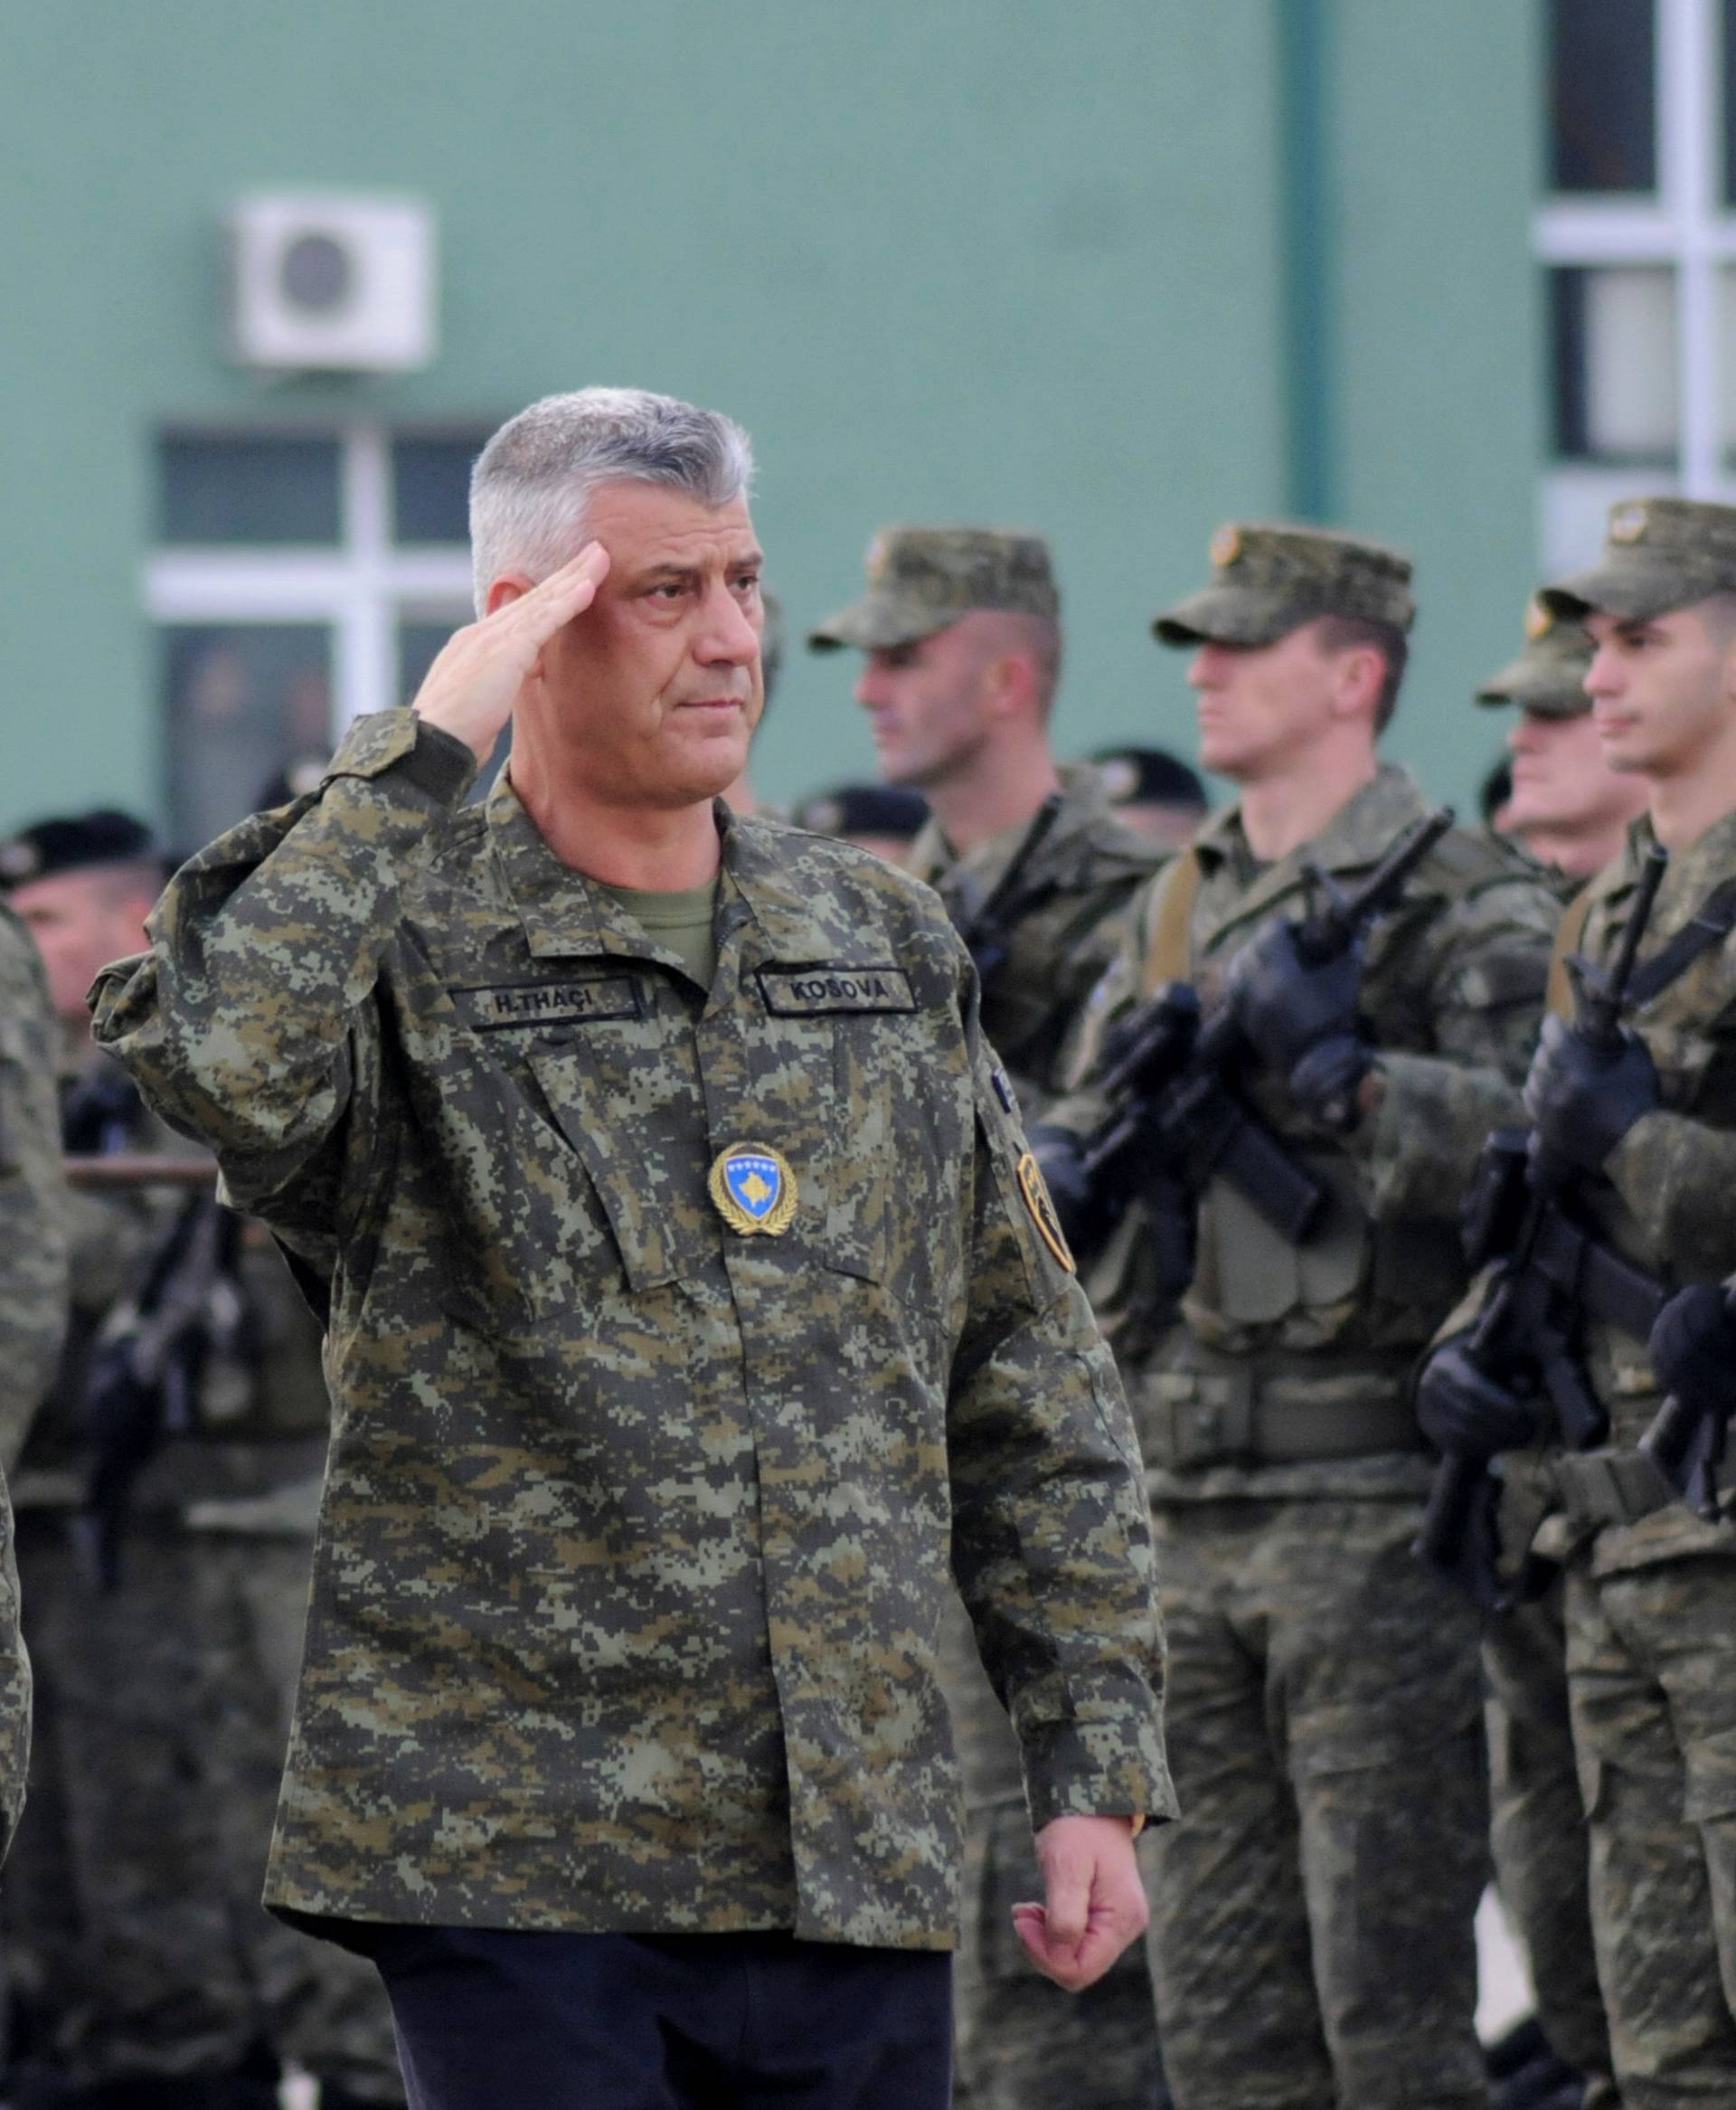 Kosovo's President Hashim Thaci attends a ceremony of security forces